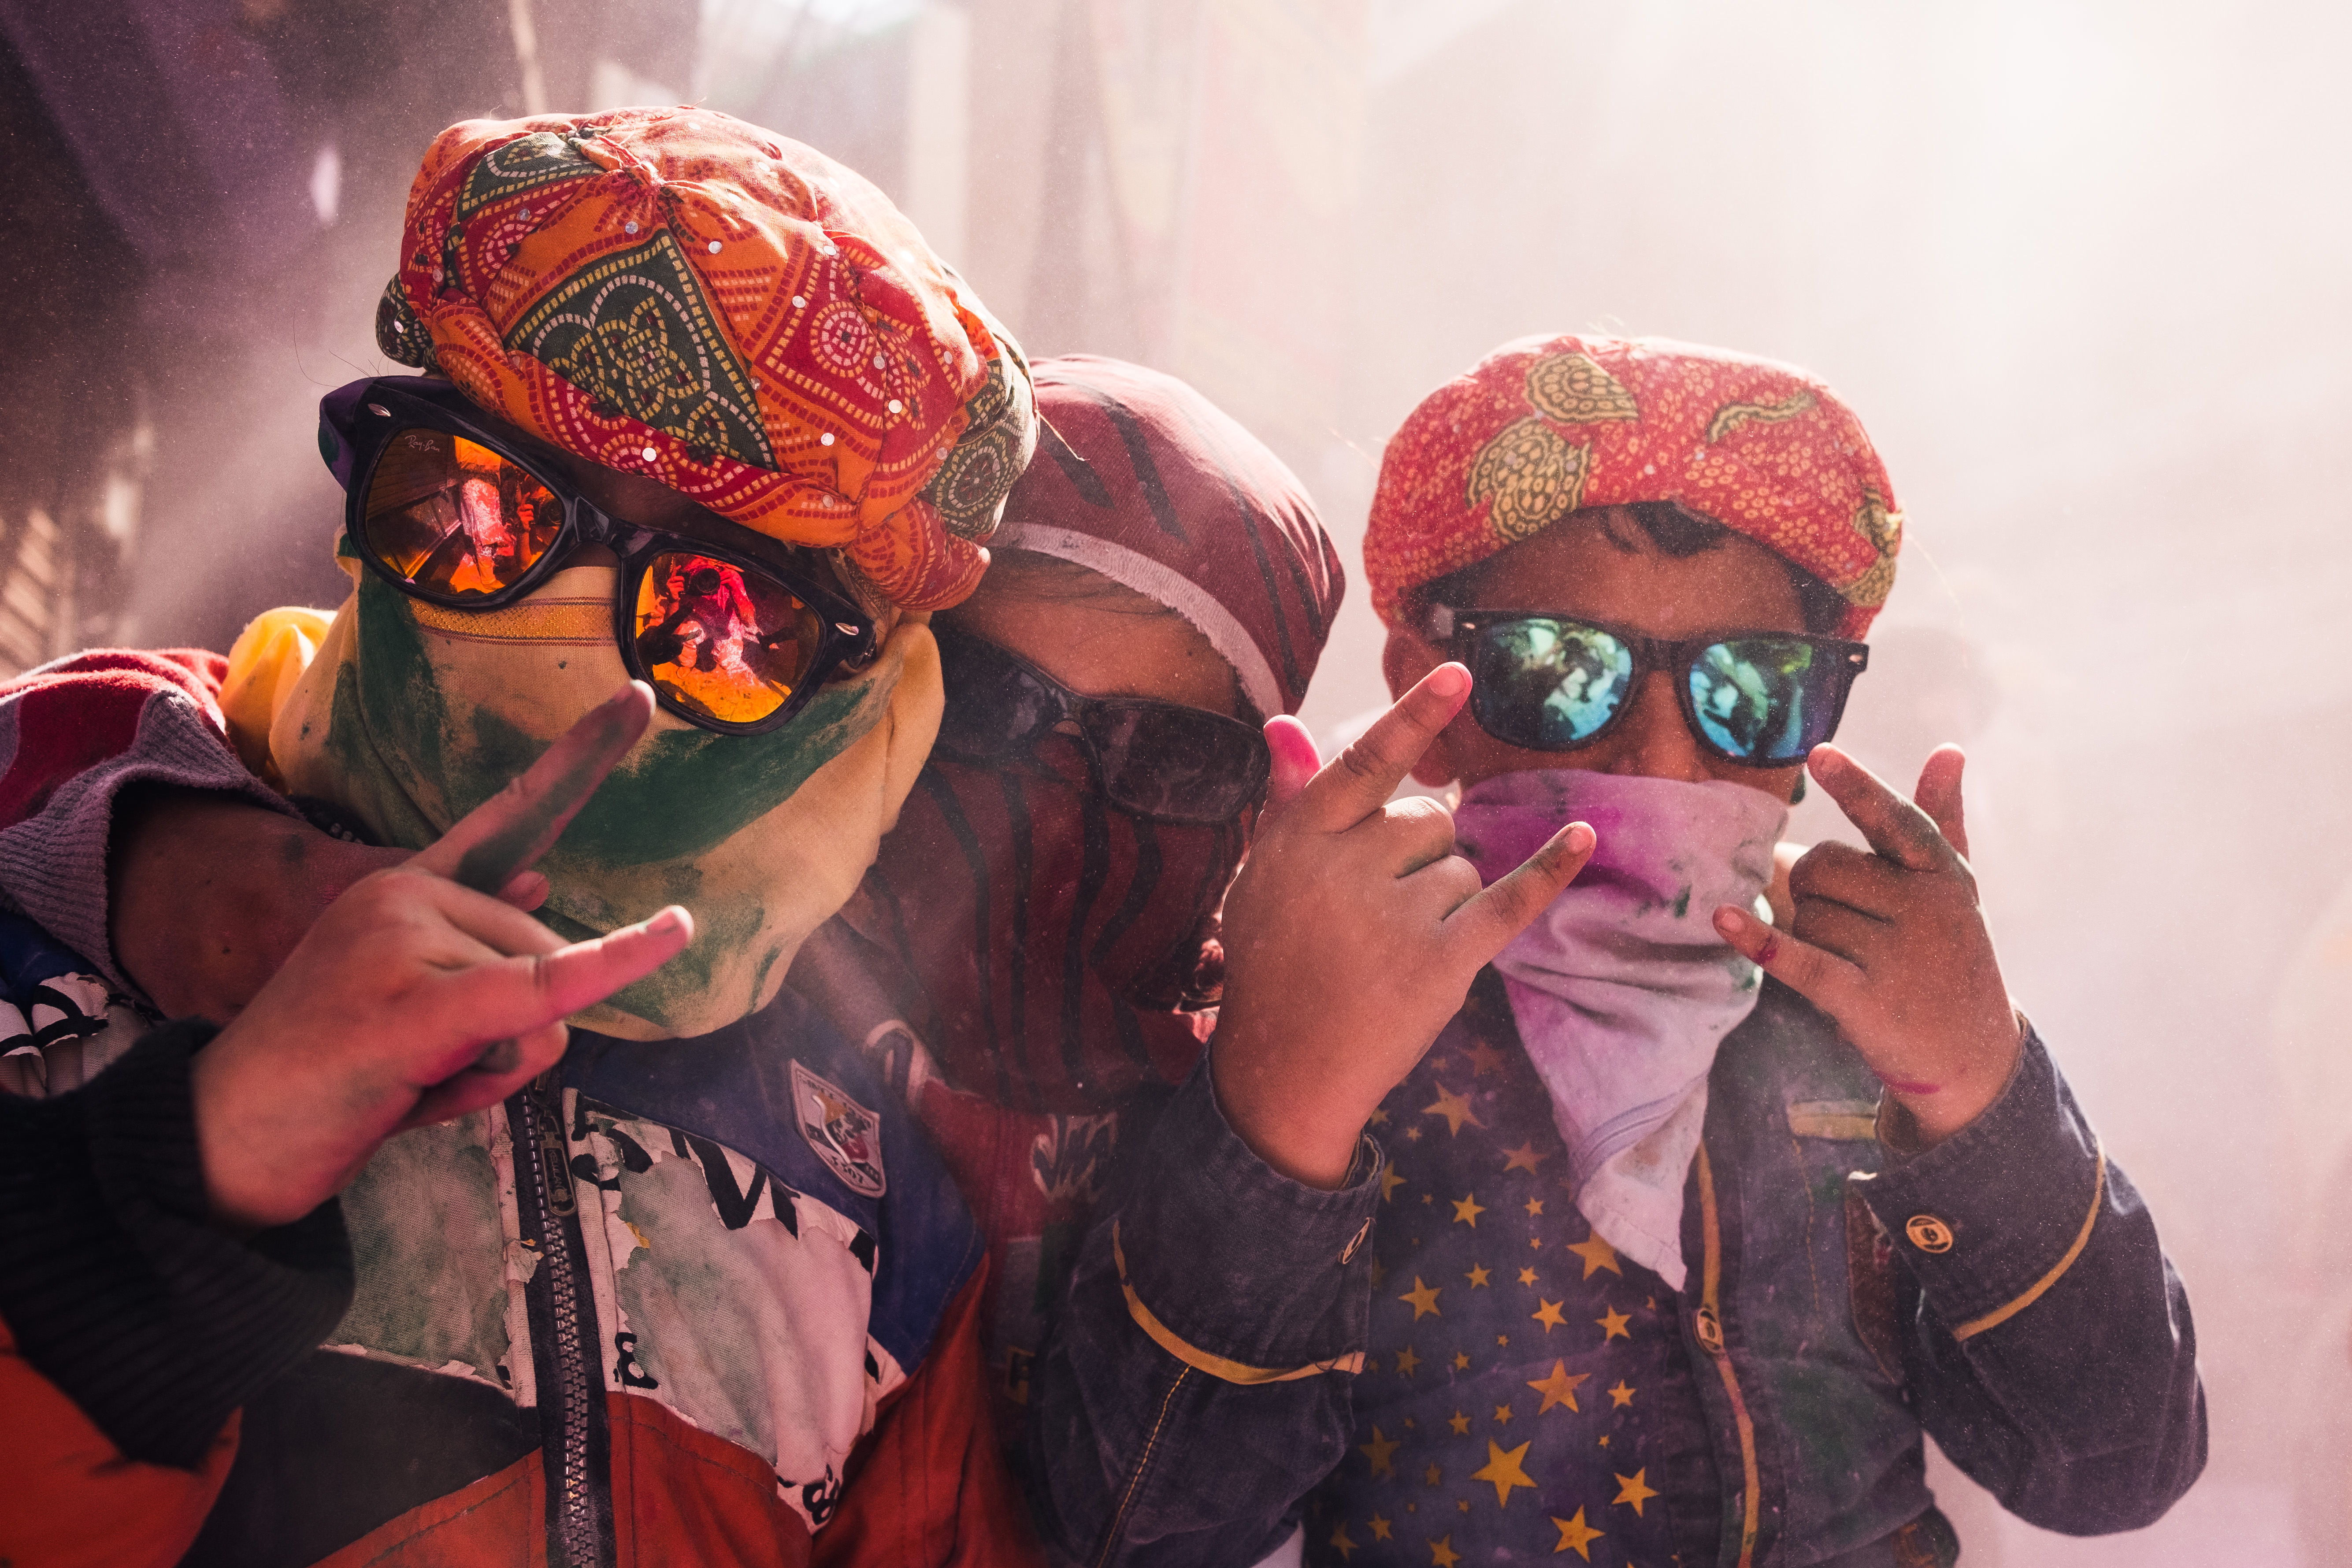 India Street Photography During Holi Festival. children participate in the festival of colors. Images by Jason Vinson